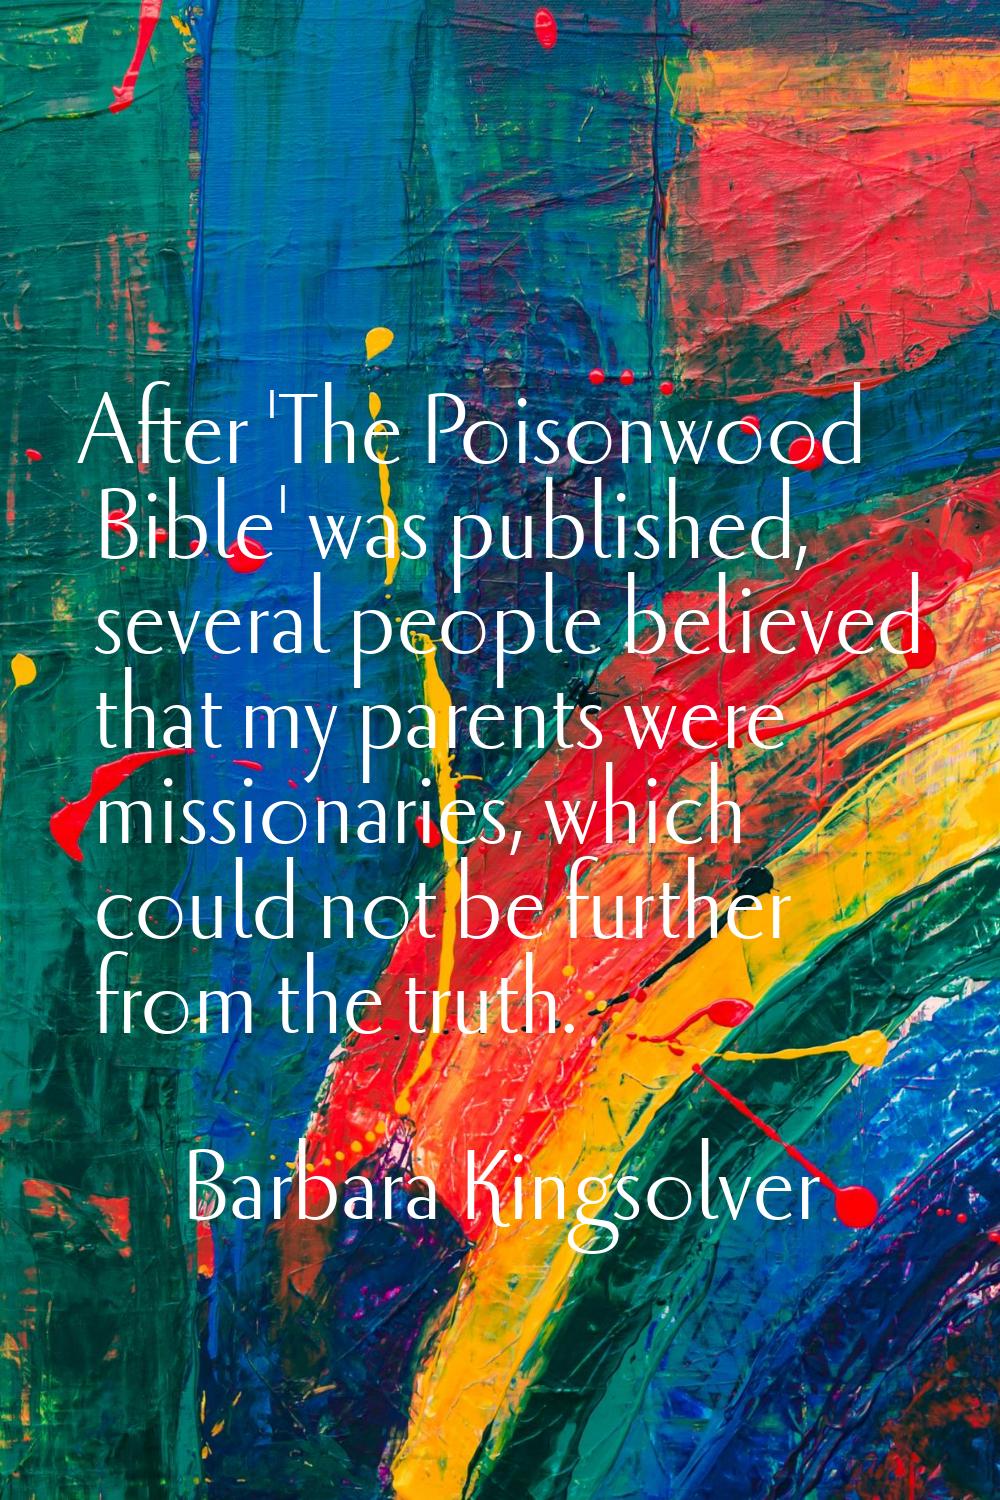 After 'The Poisonwood Bible' was published, several people believed that my parents were missionari